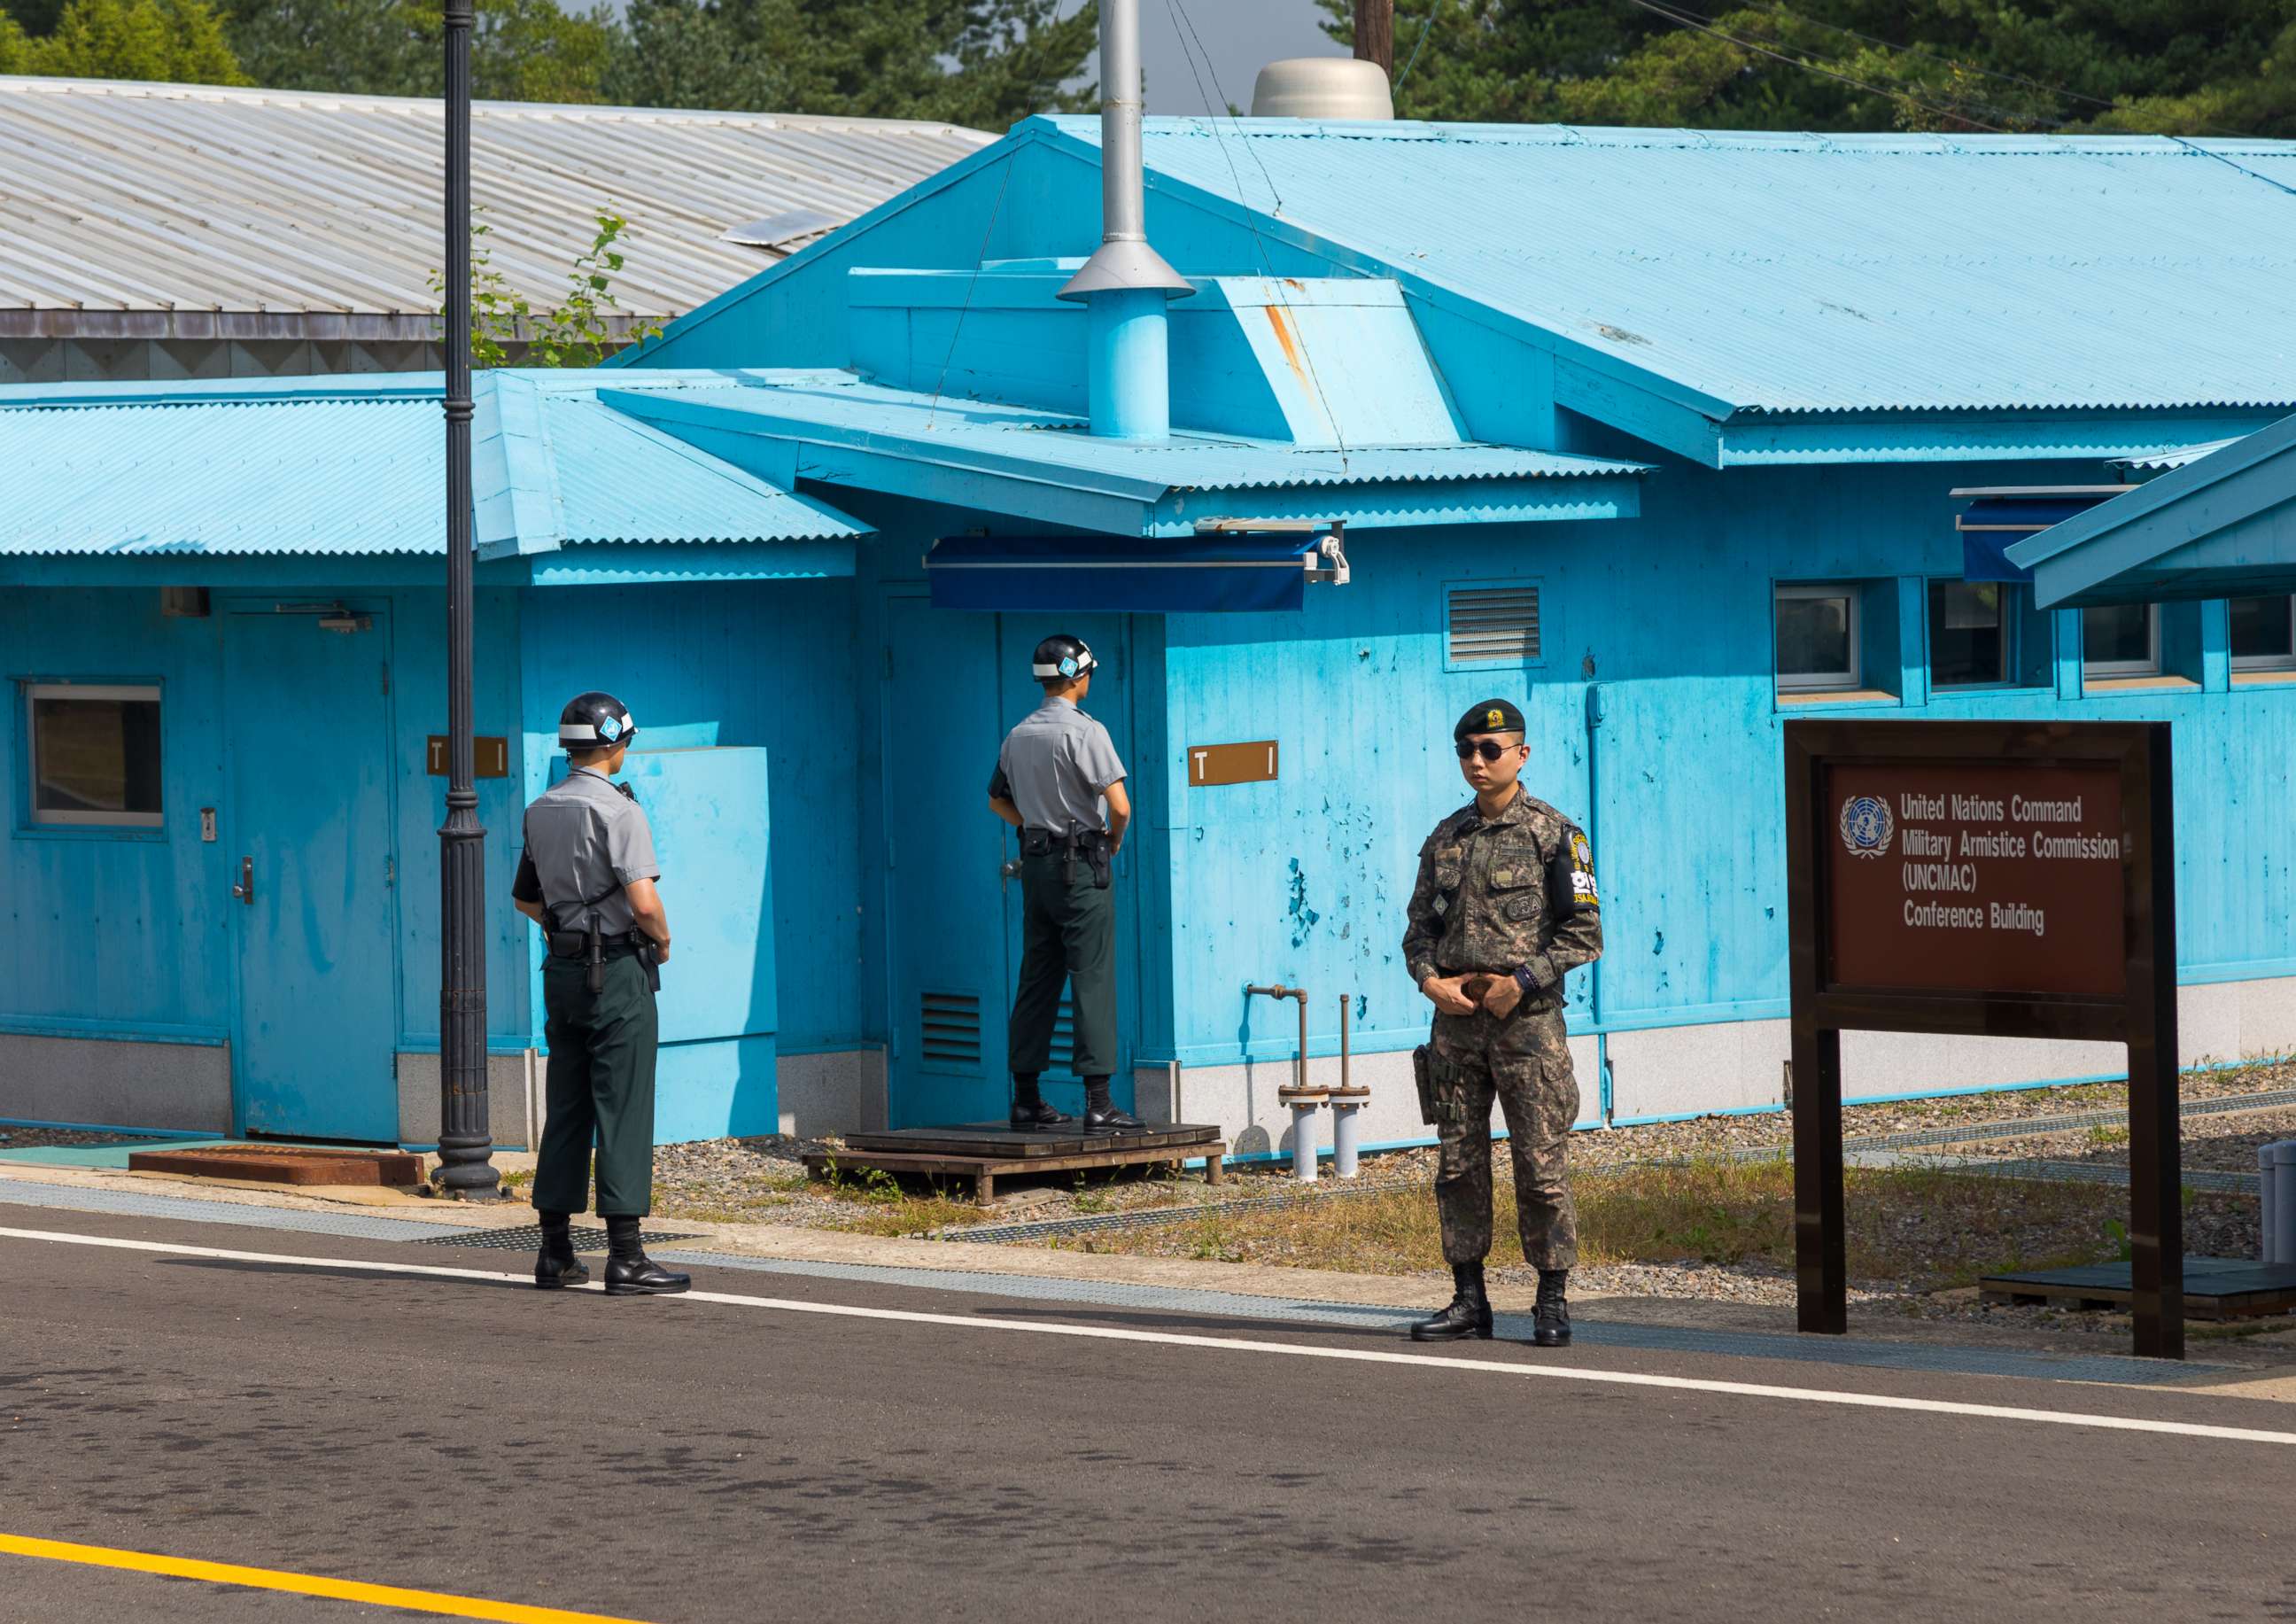 PHOTO: South Korean soldiers in the joint security area on the border between the two Koreas, North Hwanghae Province, Panmunjom, South Korea on Sept. 8, 2017 in Panmunjom, South Korea.